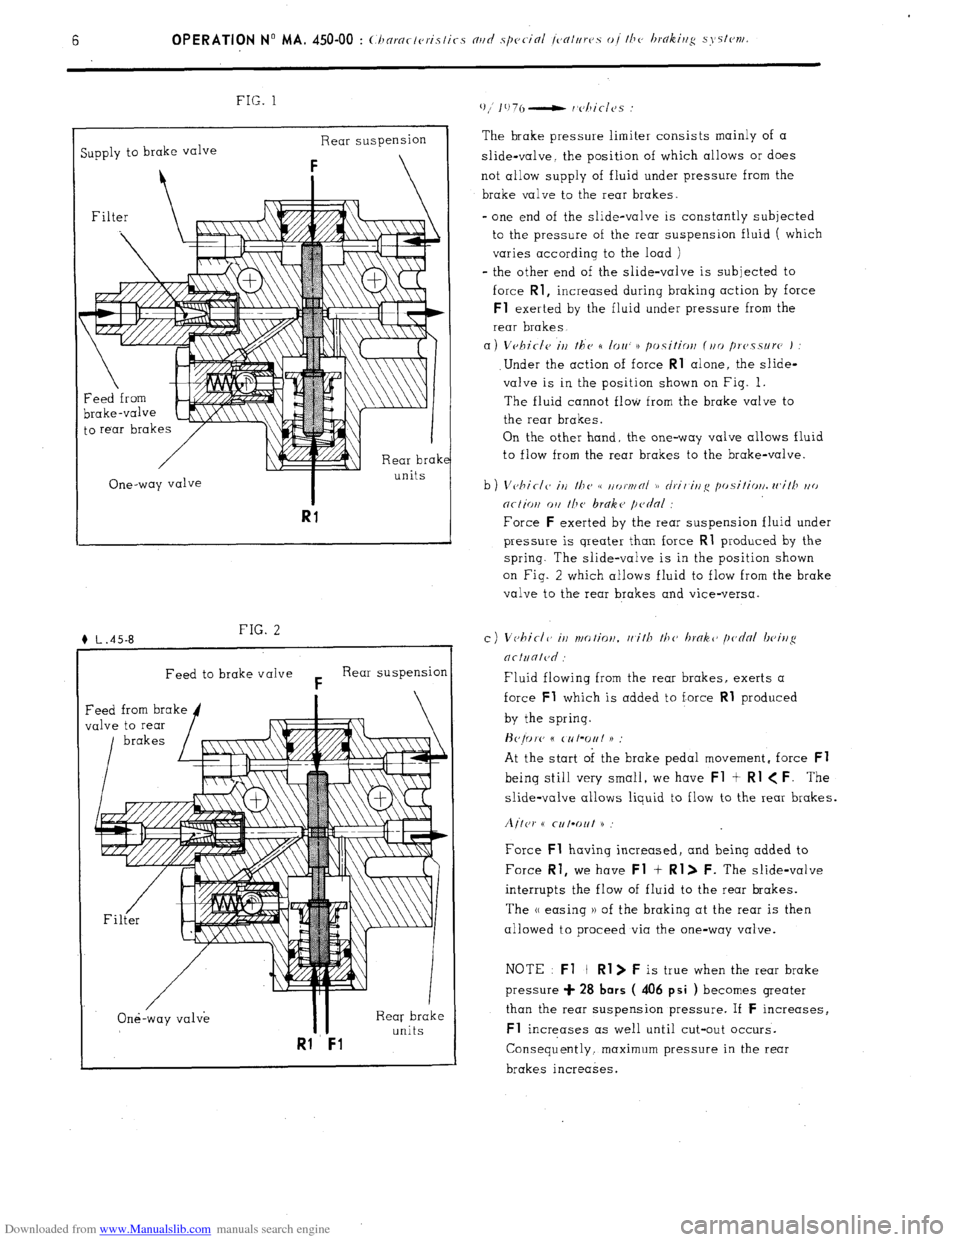 Citroen CX 1985 1.G User Guide Downloaded from www.Manualslib.com manuals search engine FIG. 1 
Supply to brake valve Rear suspension 
i  
Filter 
\--Iii 
I 
Rear brak 
. . 
One-way valve 
I units 
Rl 
Feed to brake valve F Rear su